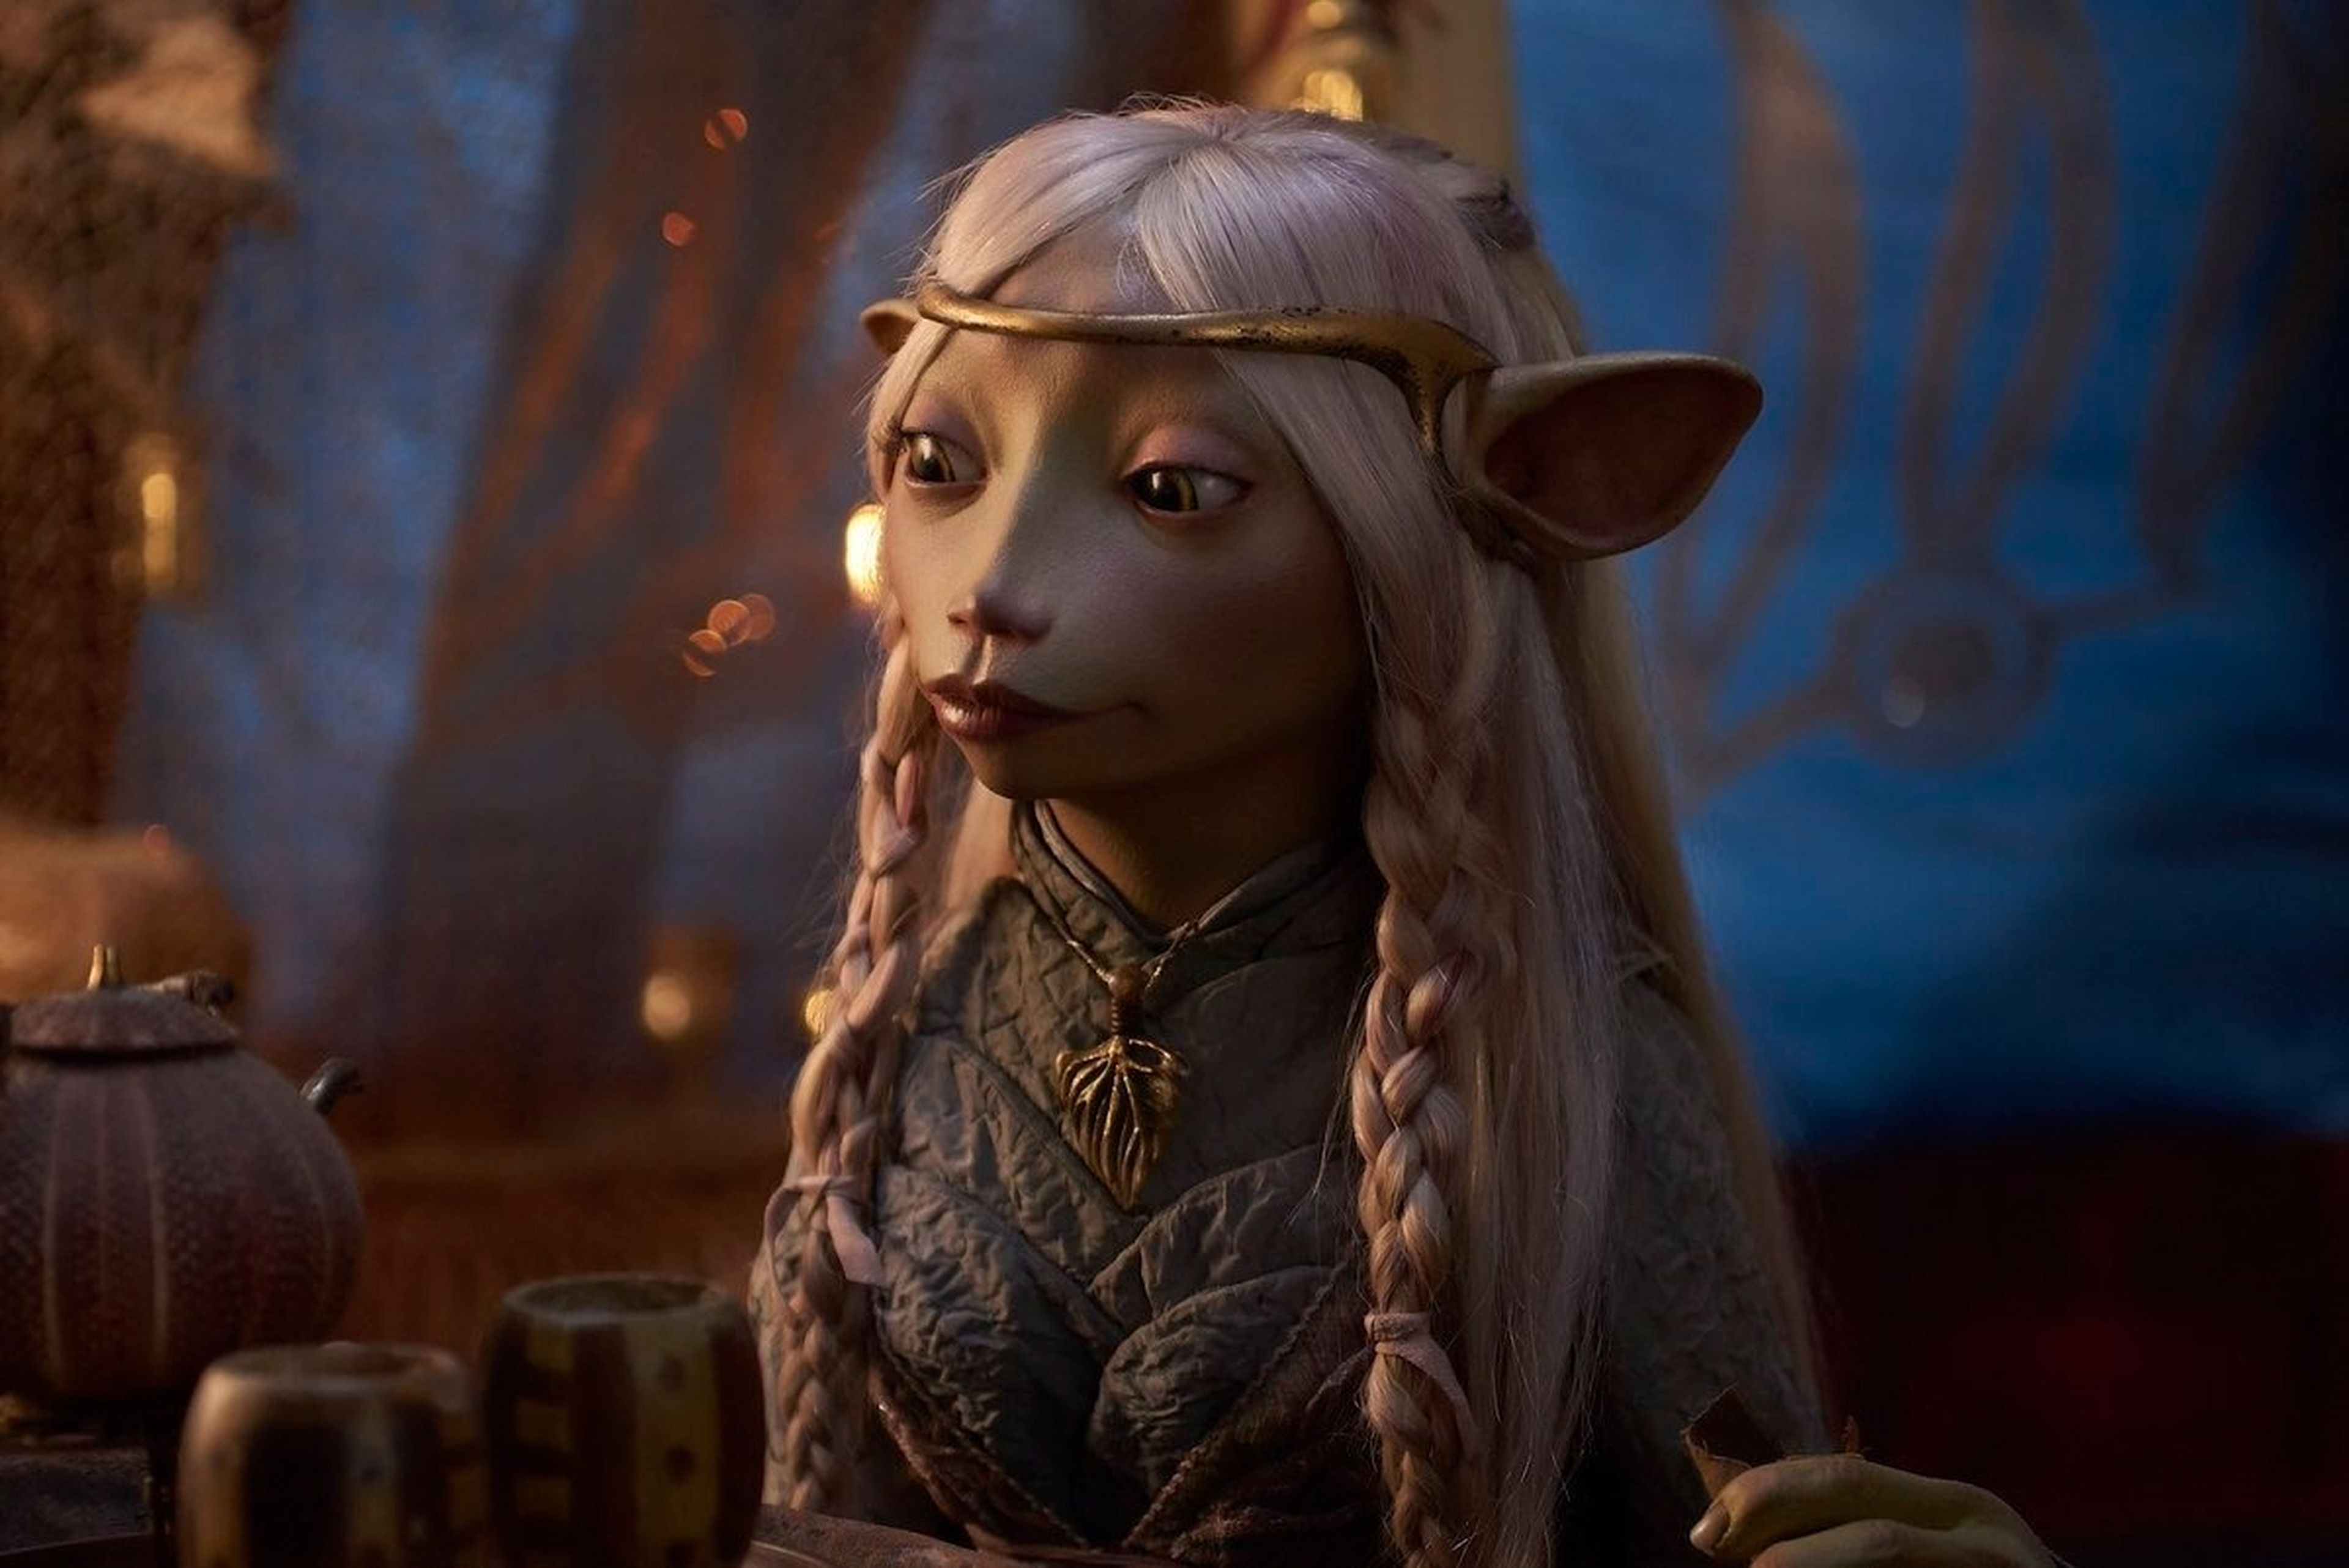 The Dark Crystal: Age of Resistance - Brea